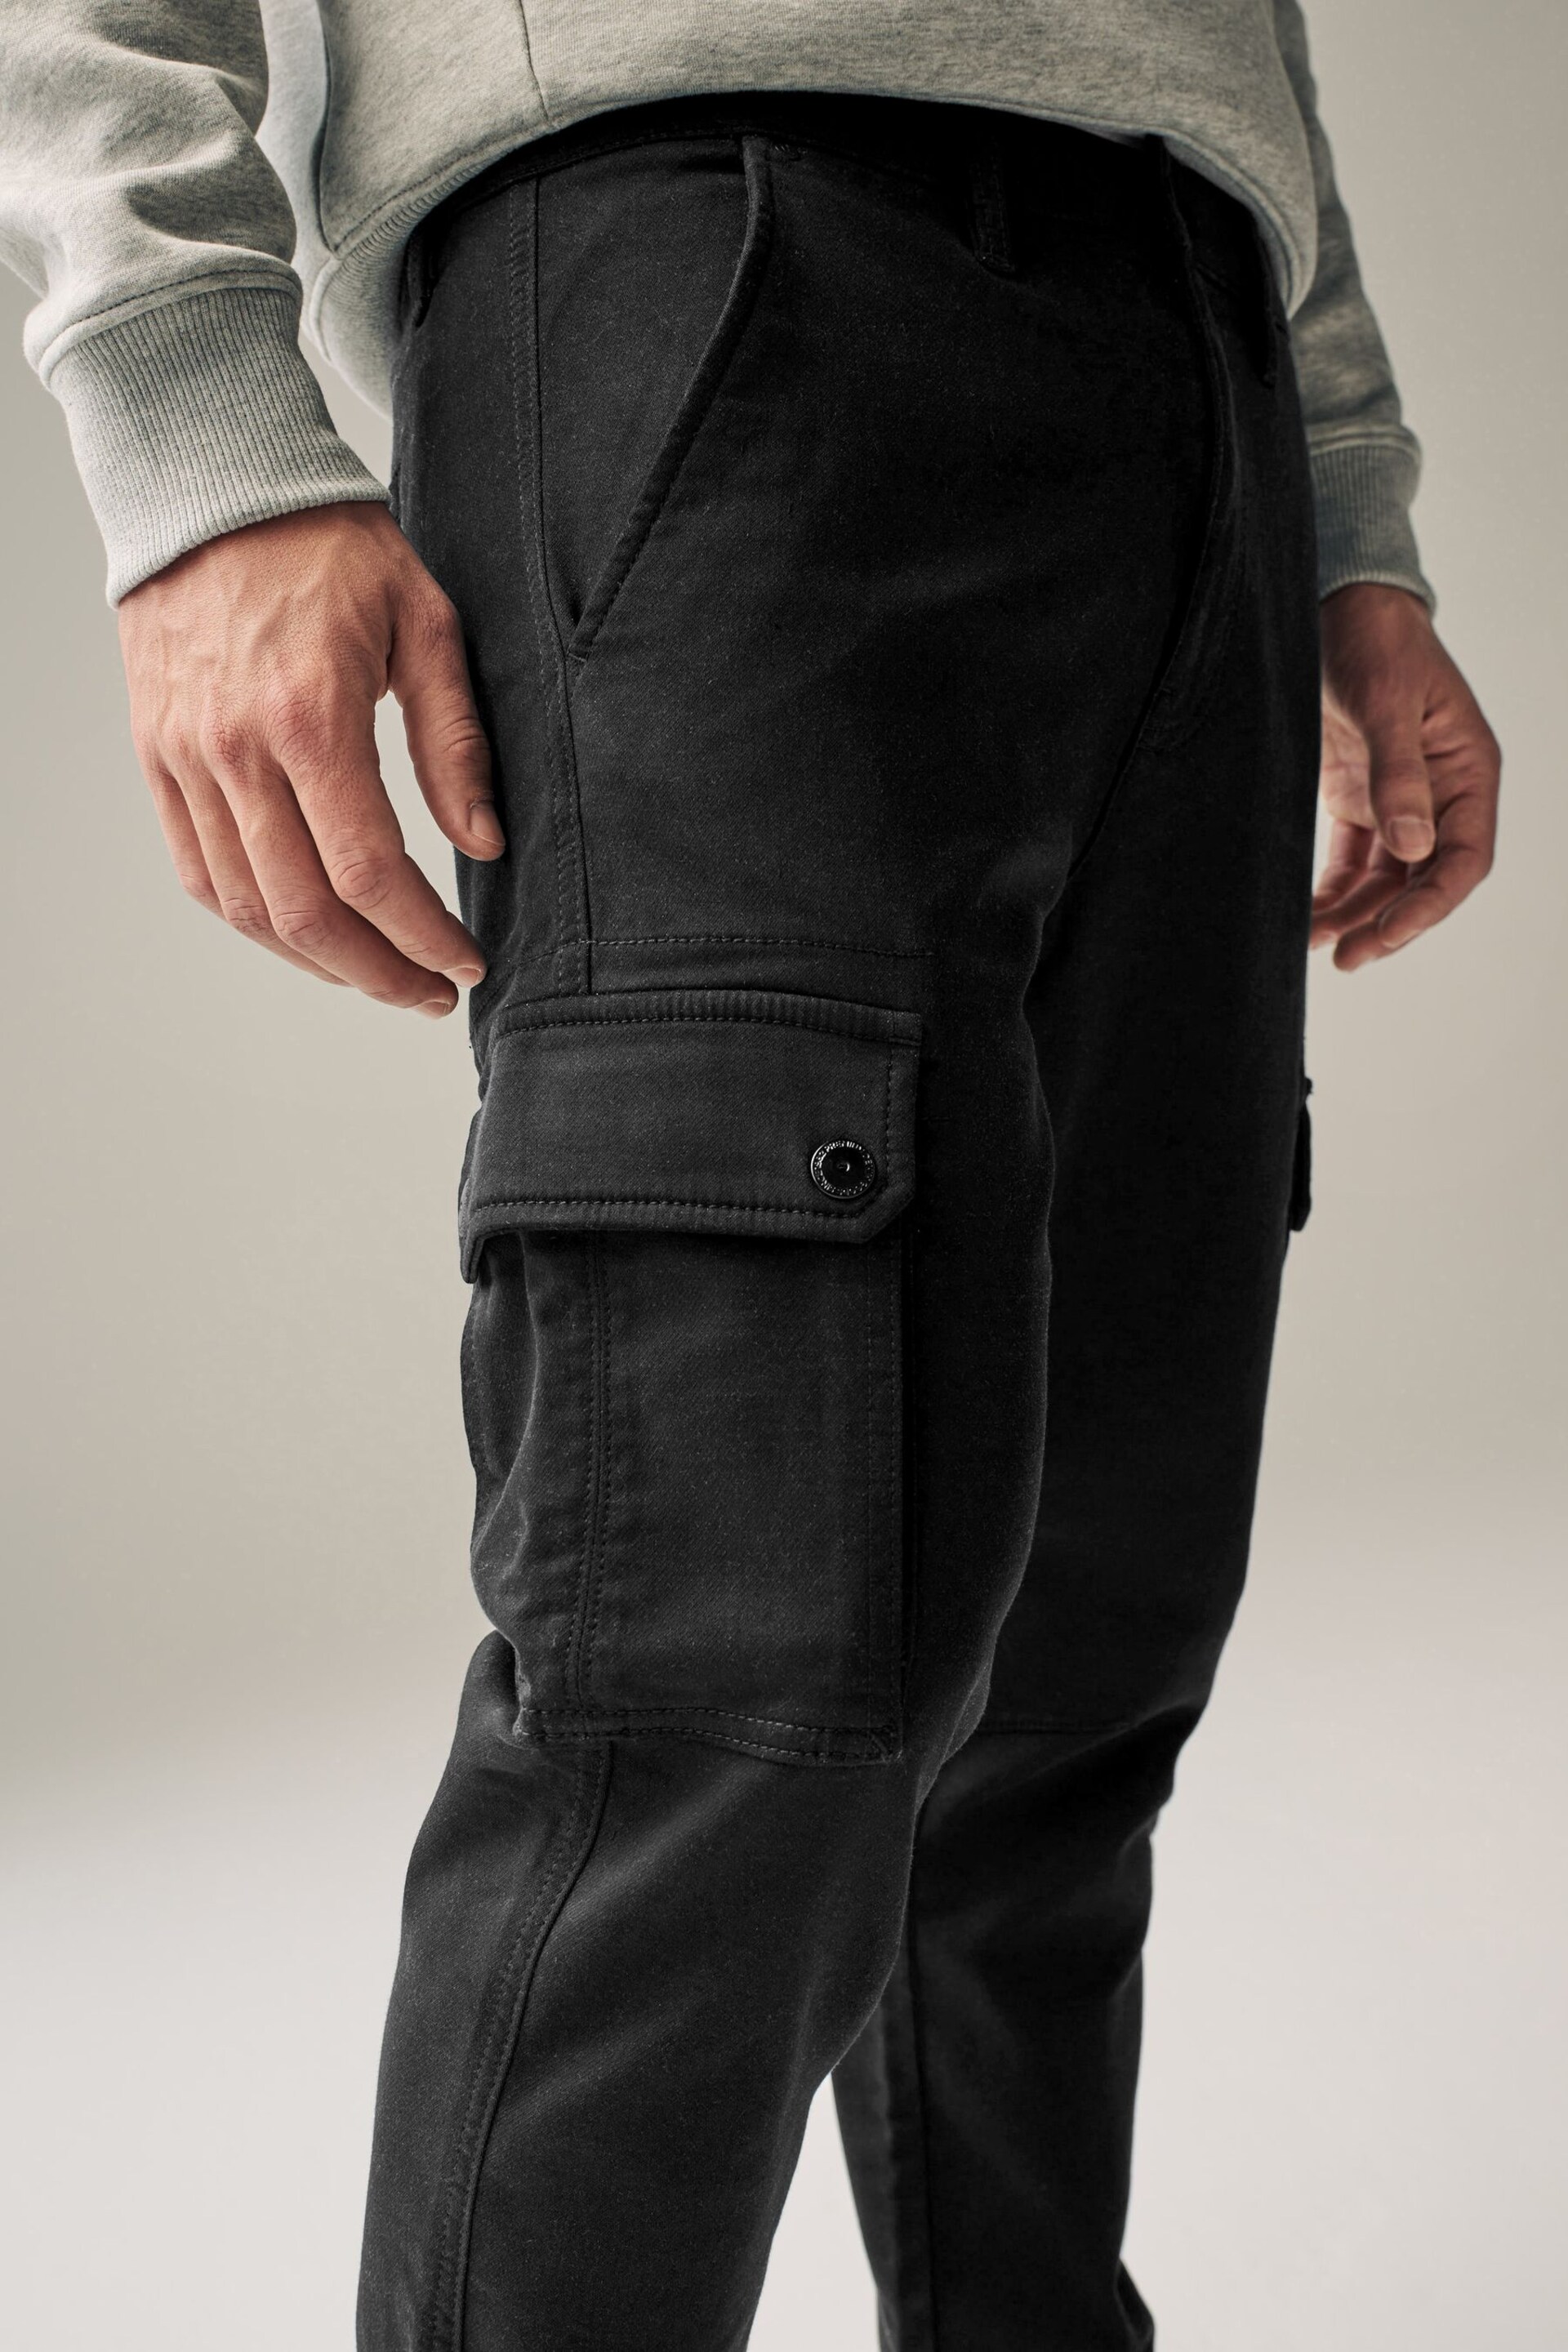 Black Motionflex Cargo Trousers - Image 6 of 10